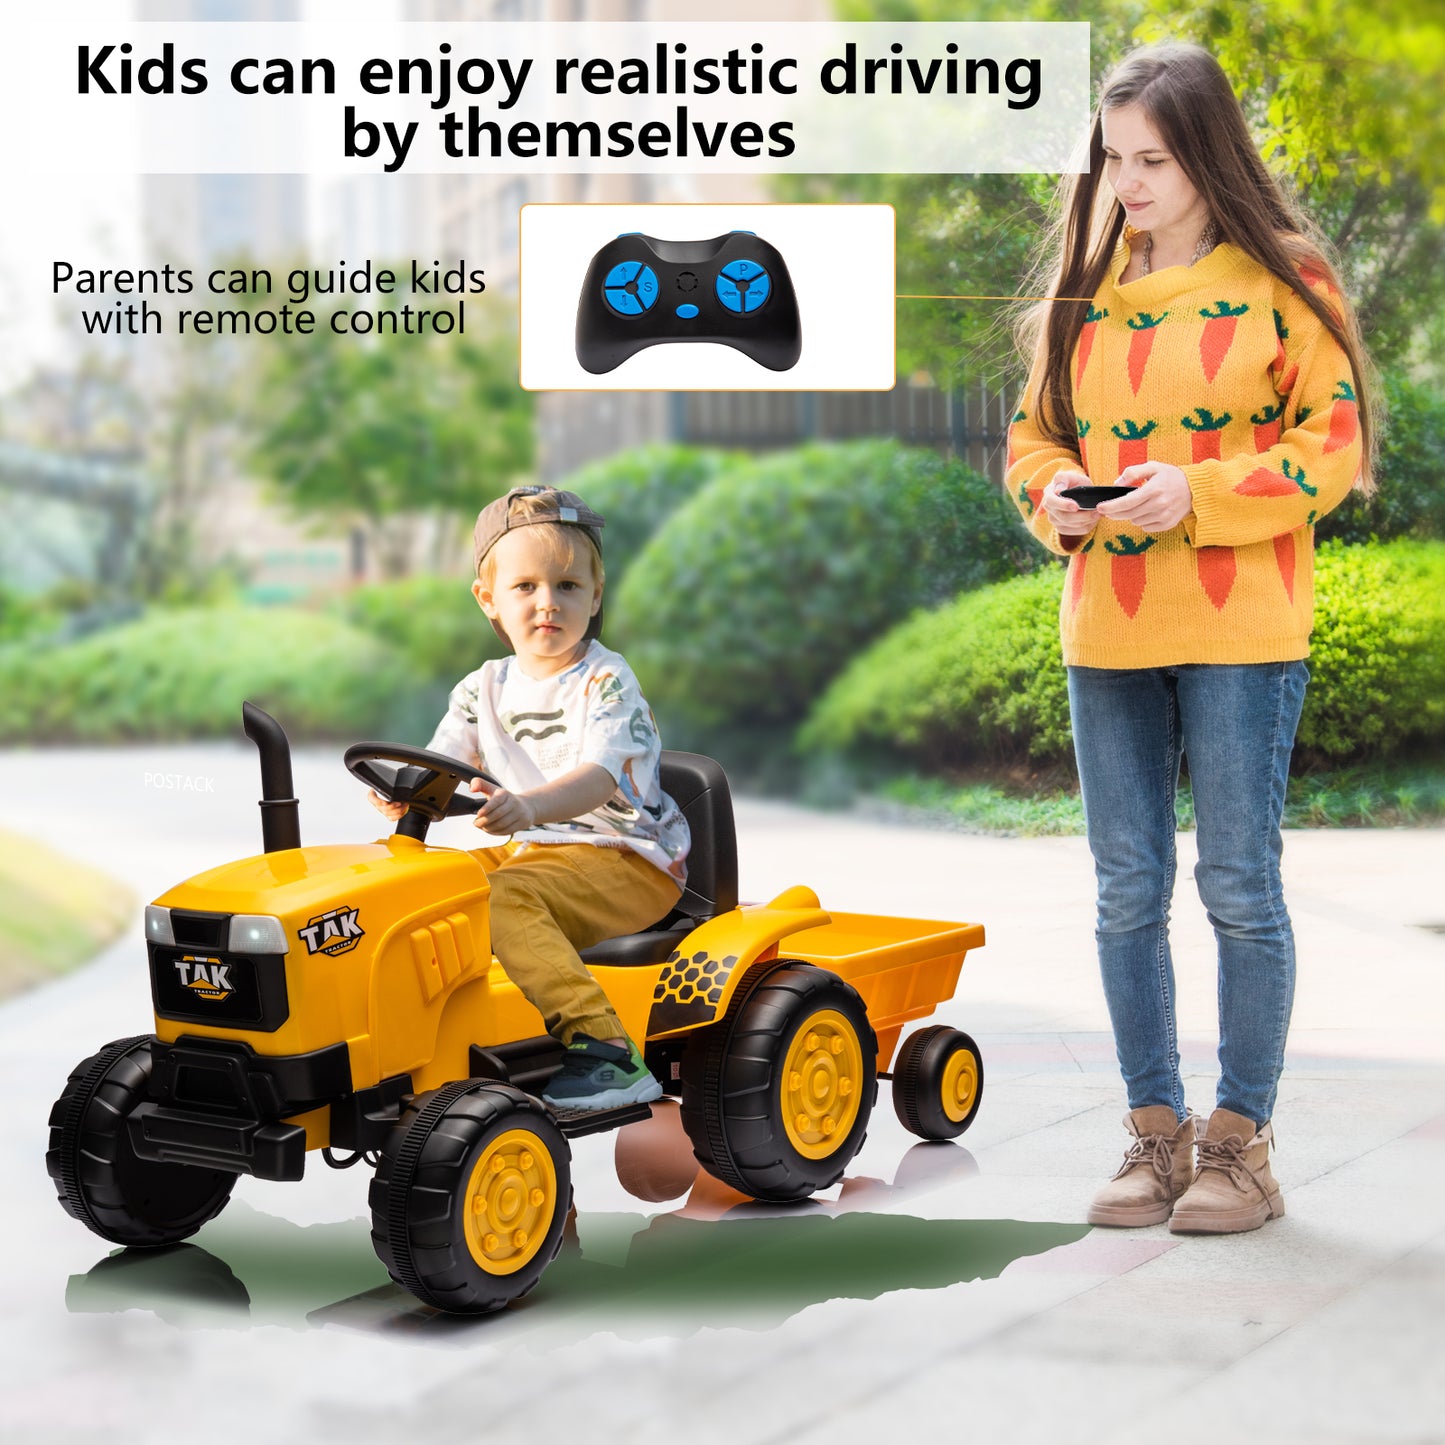 12V Kids Ride on Tractor Electric Excavator Battery Powered Motorized Car for Kids Ages 3-6, with , Detachable Trailer, Remote Control, & Bright Headlight, Yellow